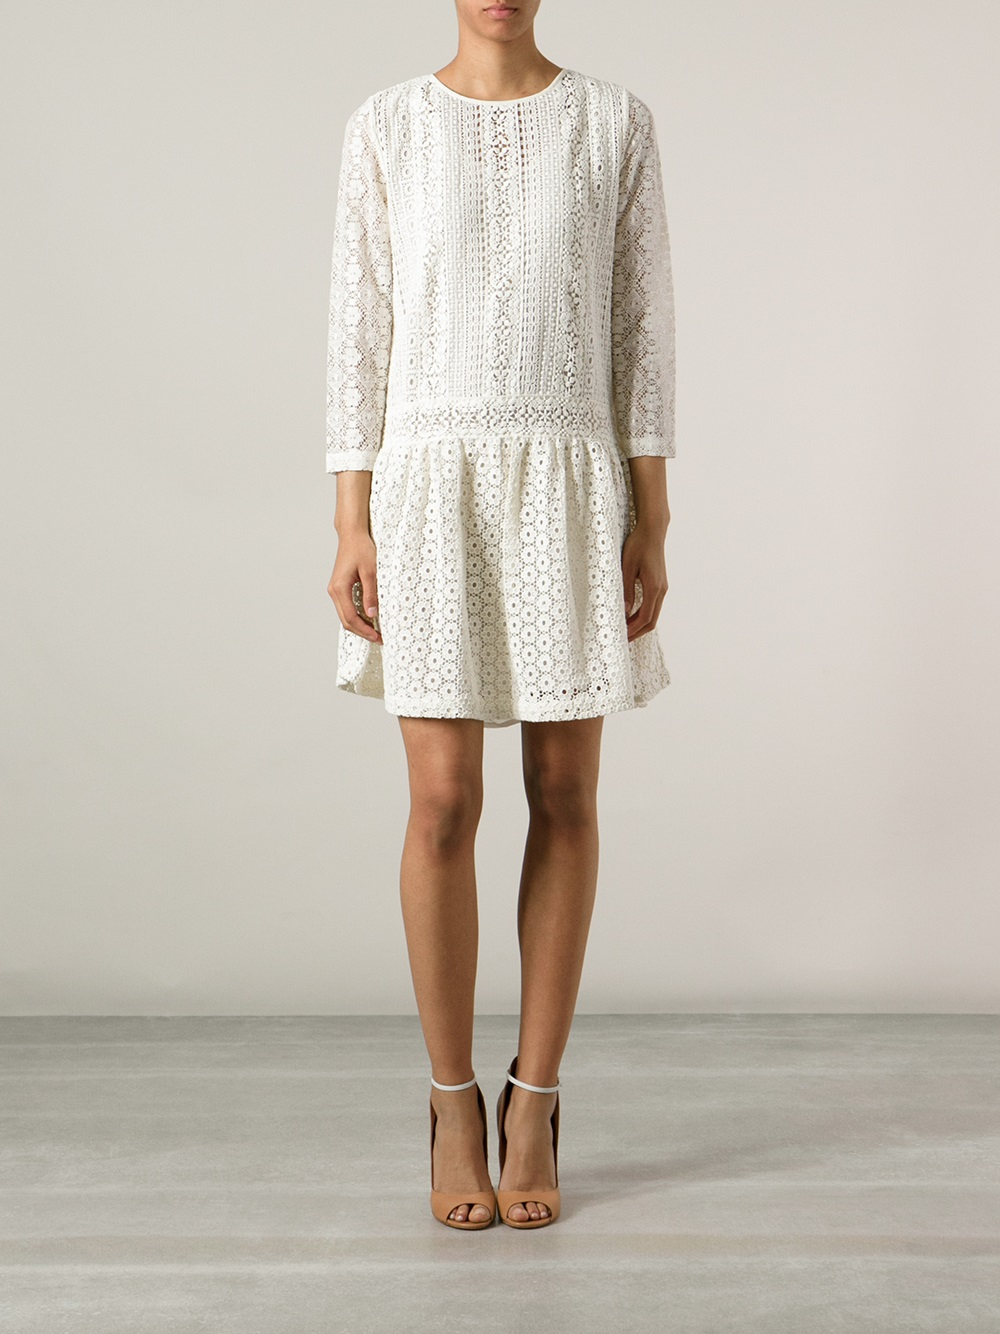 Lyst - Vanessa Bruno Athé Lace Athé Dress in White